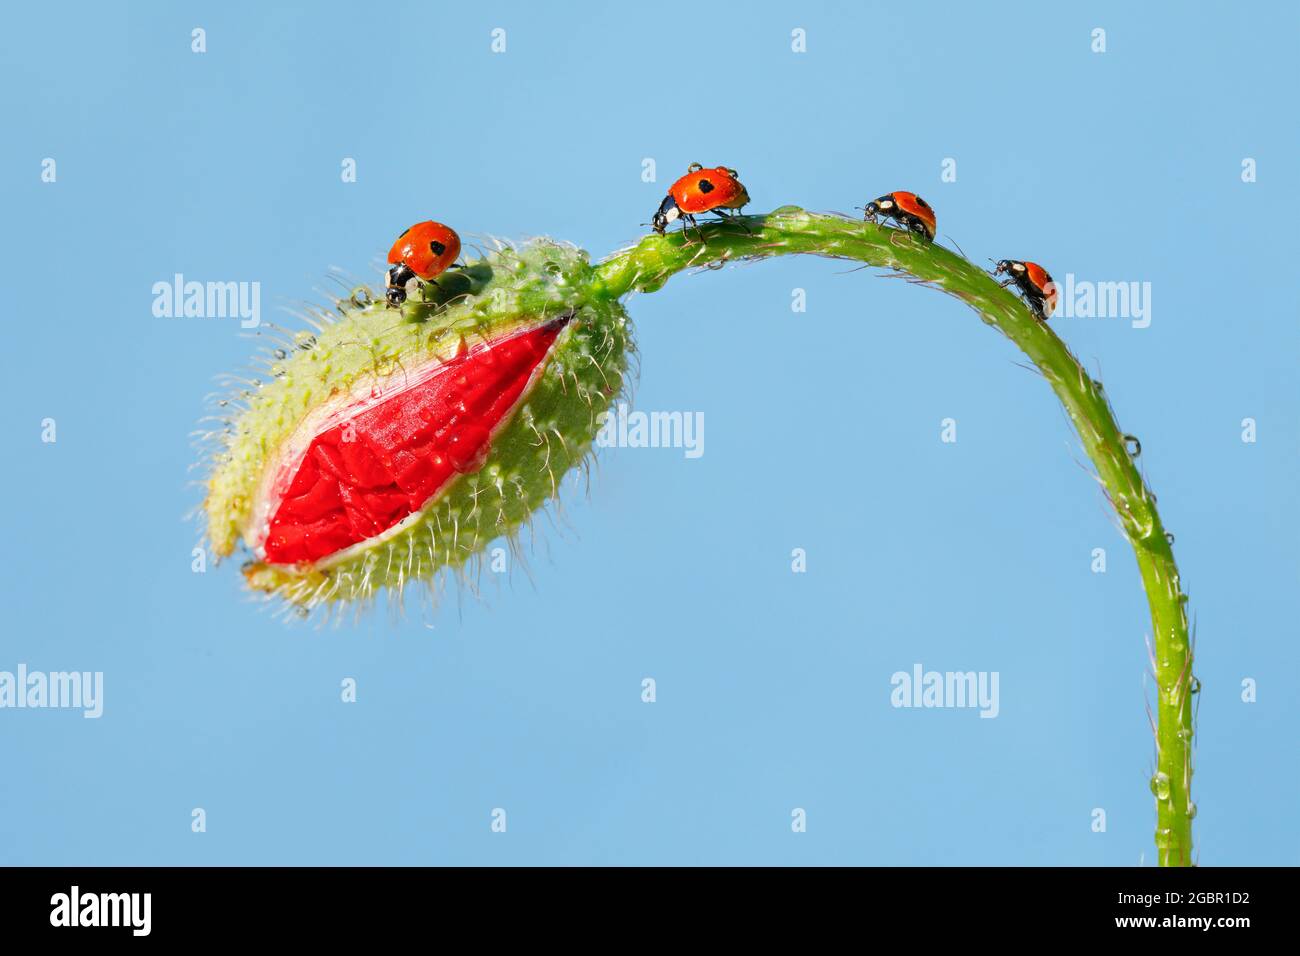 zoology, insects (Insecta), two-spot ladybird on poppy, Switzerland, NO-EXCLUSIVE-USE FOR FOLDING-CARD-GREETING-CARD-POSTCARD-USE Stock Photo